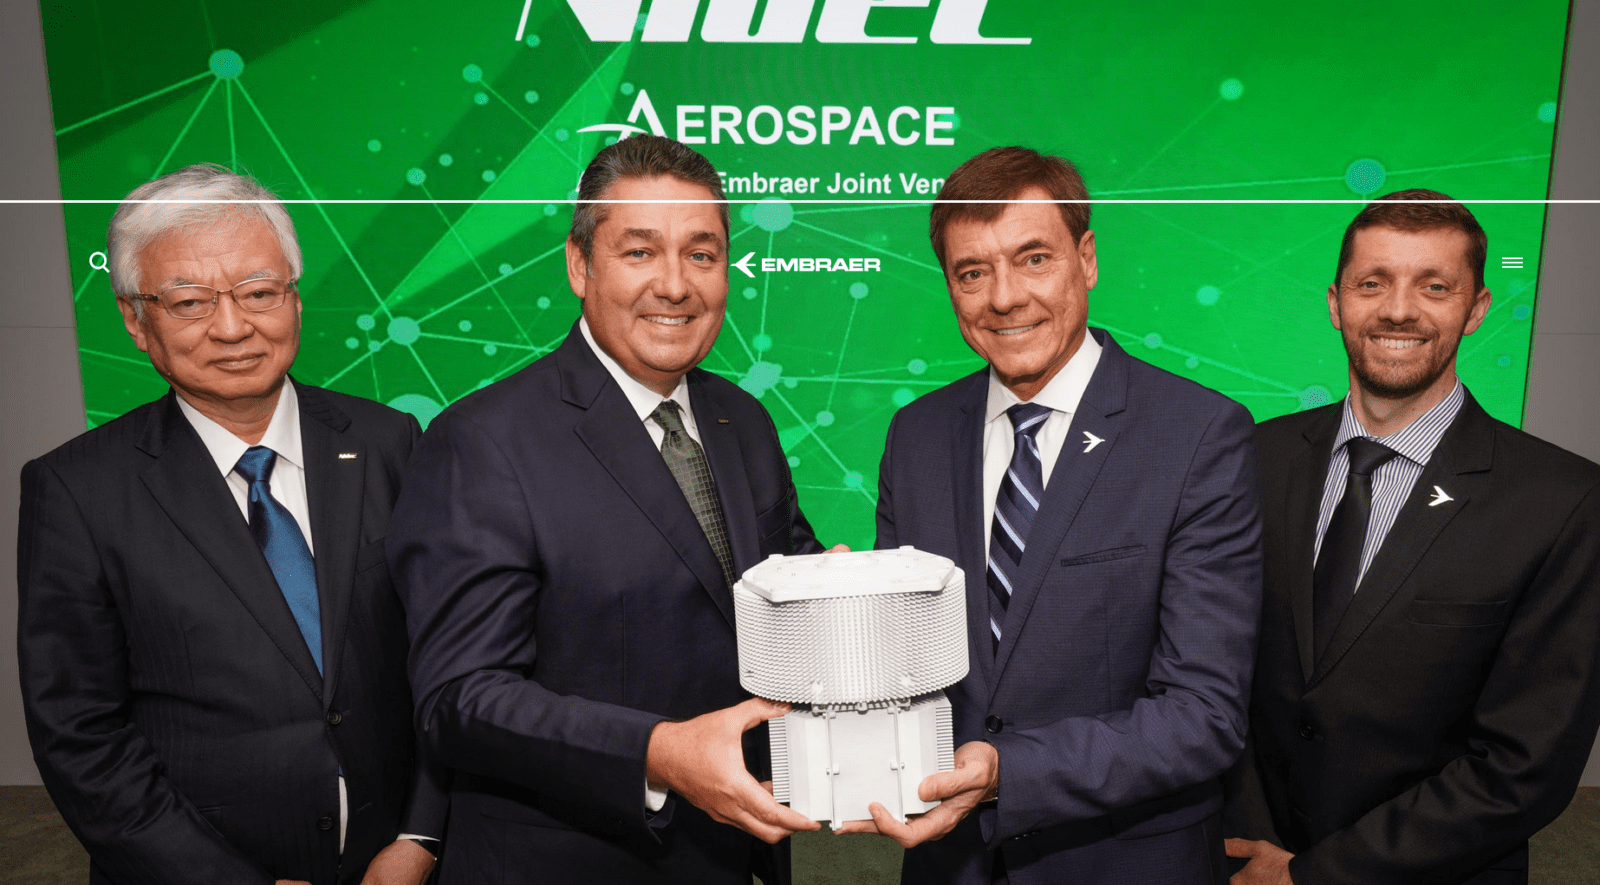 Nidec and Embraer announce joint venture agreement to develop Electric Propulsion System for the emerging aerospace industry